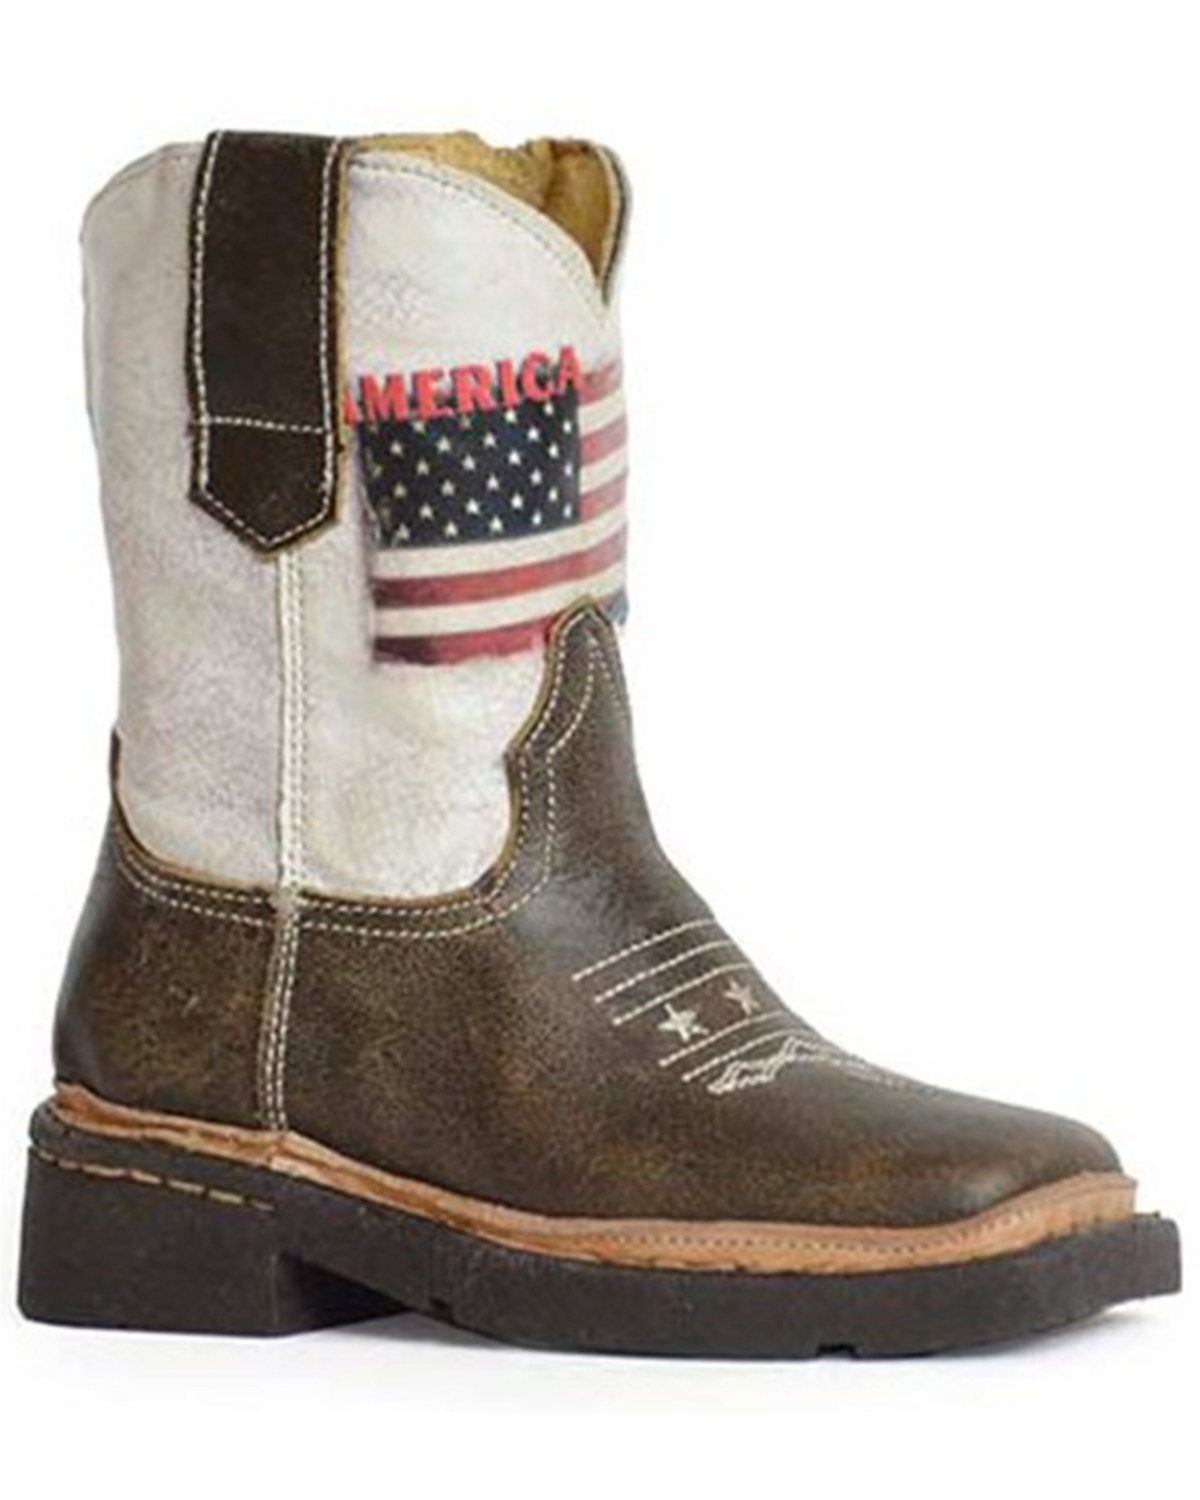 Roper Toddler Boys' America Strong Western Boots- Broad Square Toe